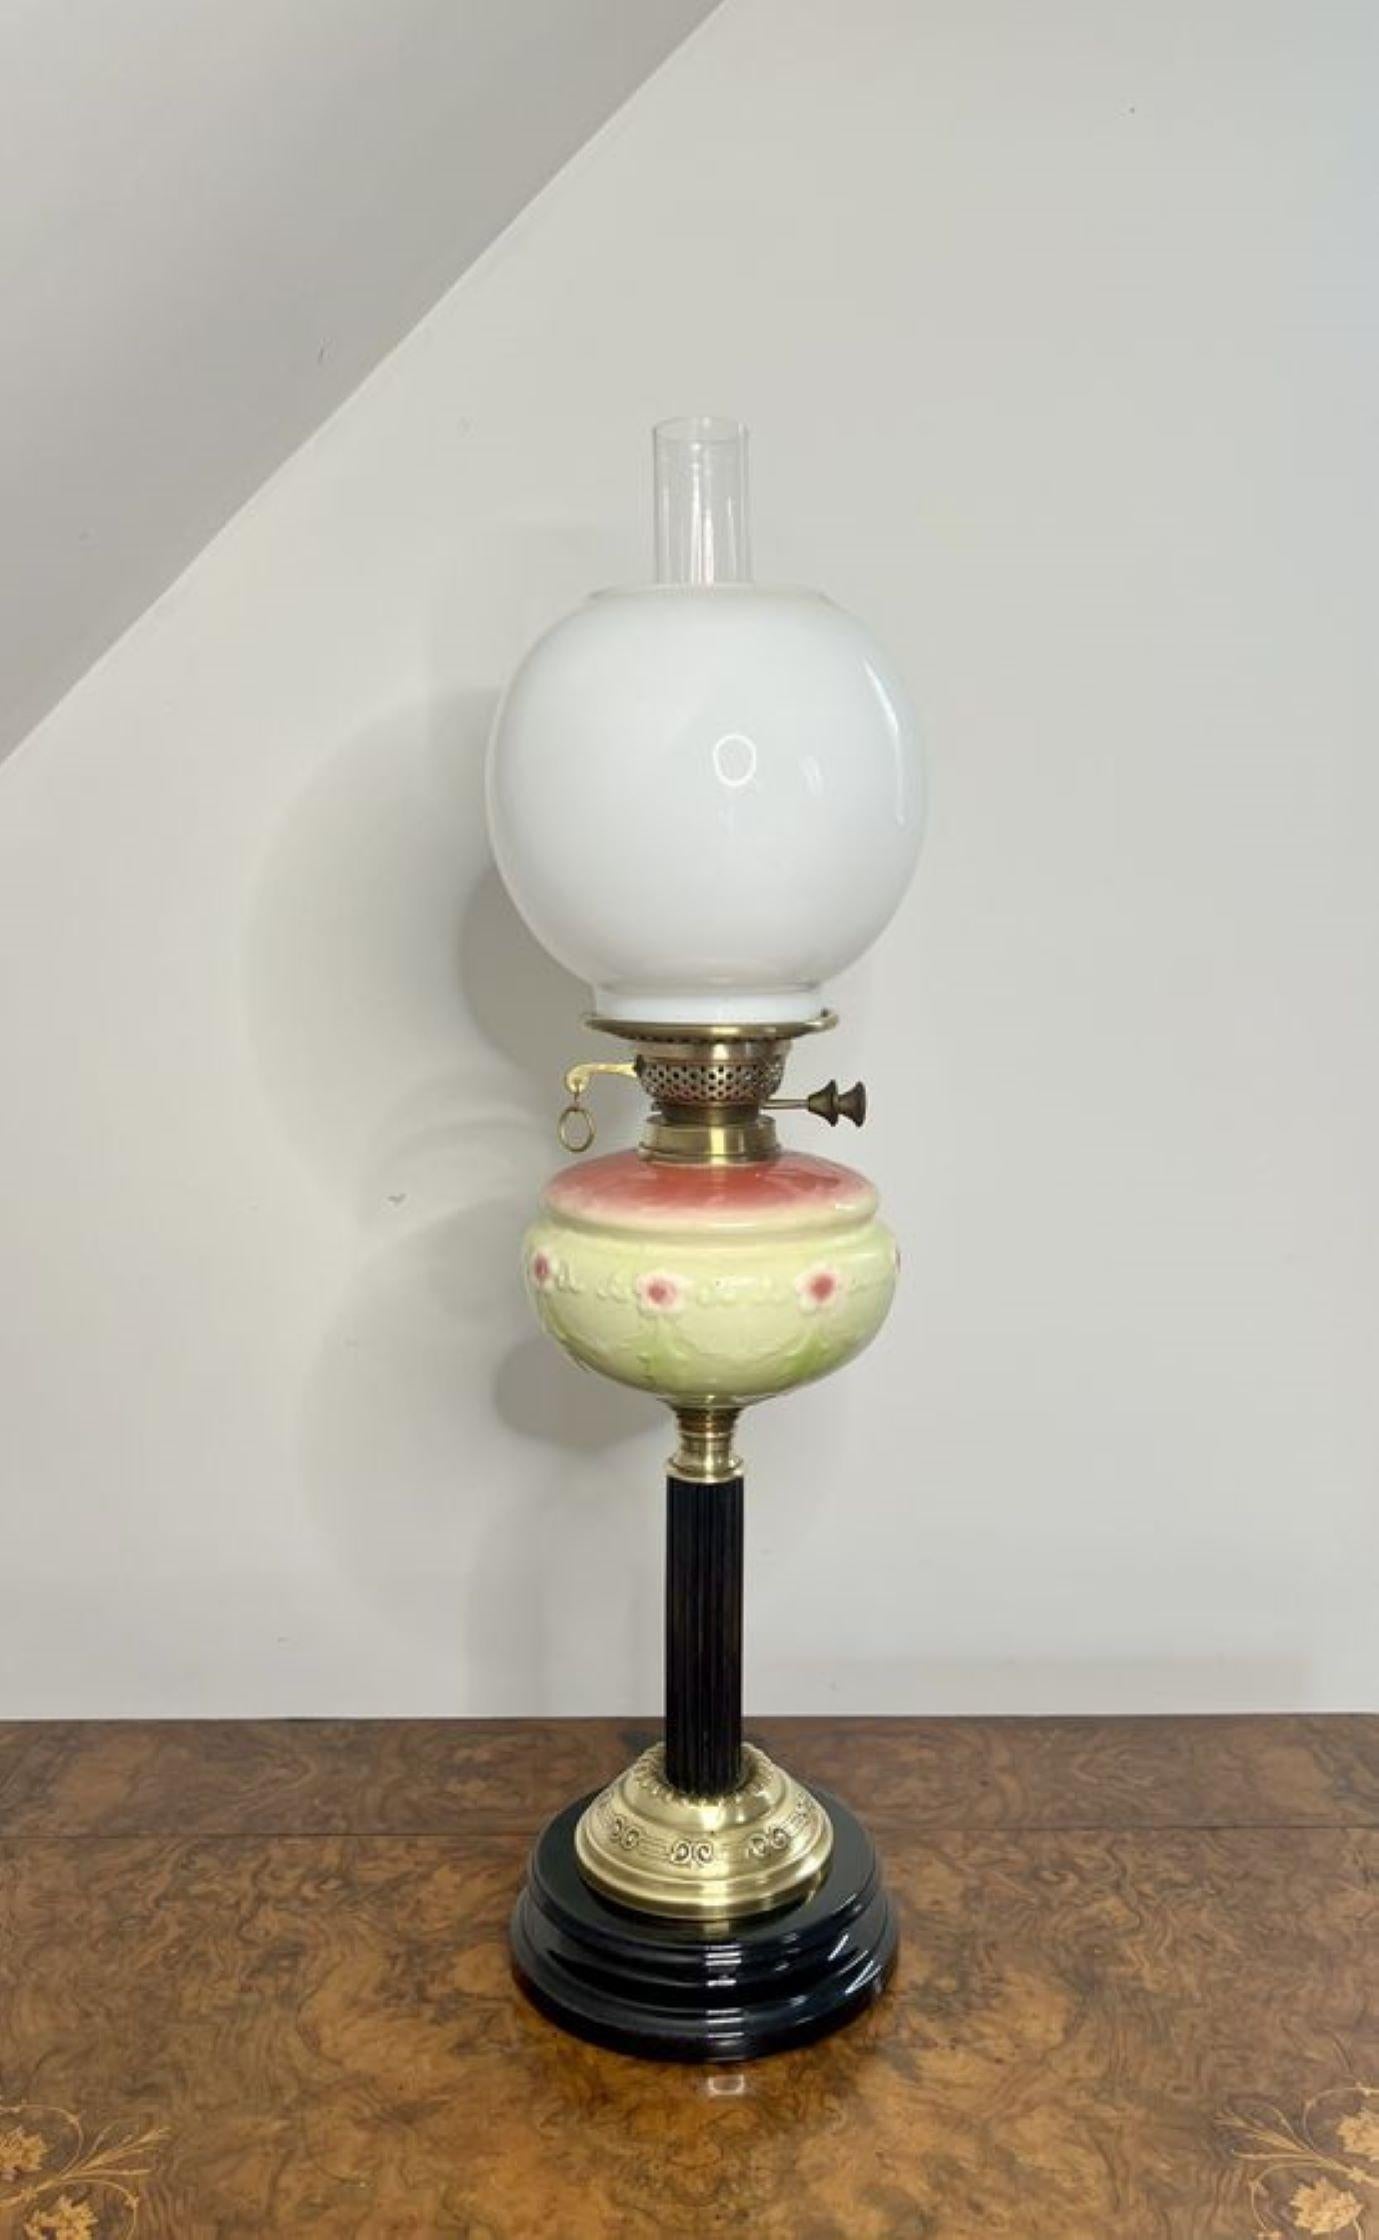 Stunning quality antique Victorian oil lamp having a quality brass oil lamp with a white glass globular shade, having a vaseline glass reservoir with a yellow ground and pink flowers, supported on a wooden column, raised on a circular brass base.